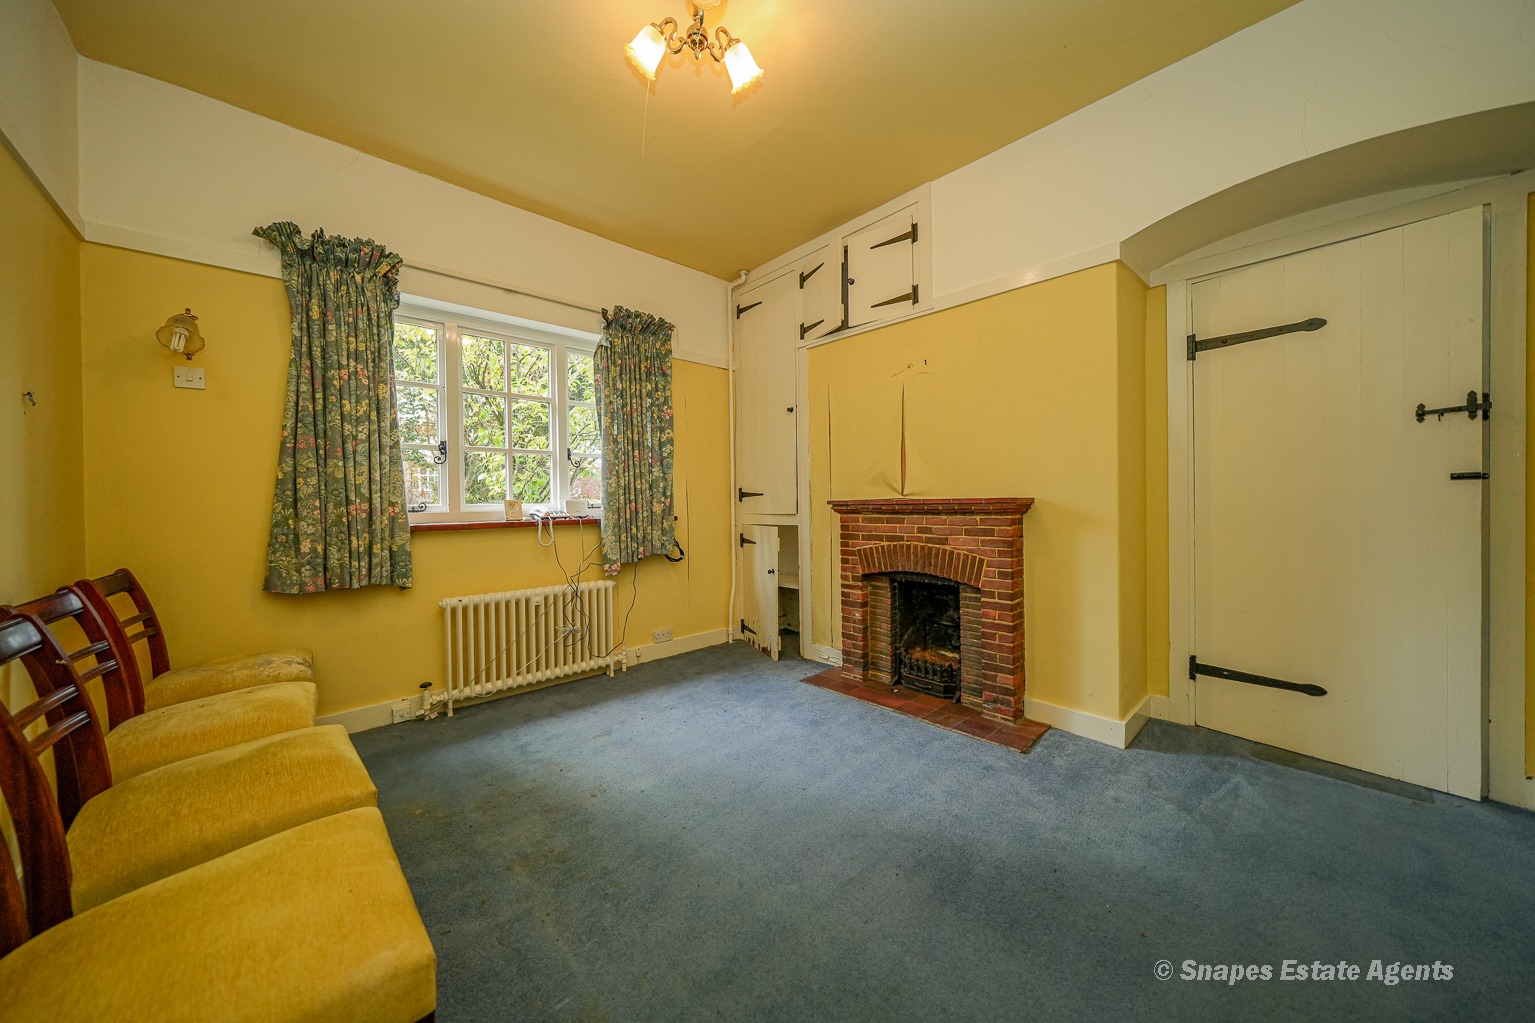 Images for Bramhall Park Road, Bramhall SK7 3DQ - FREEHOLD